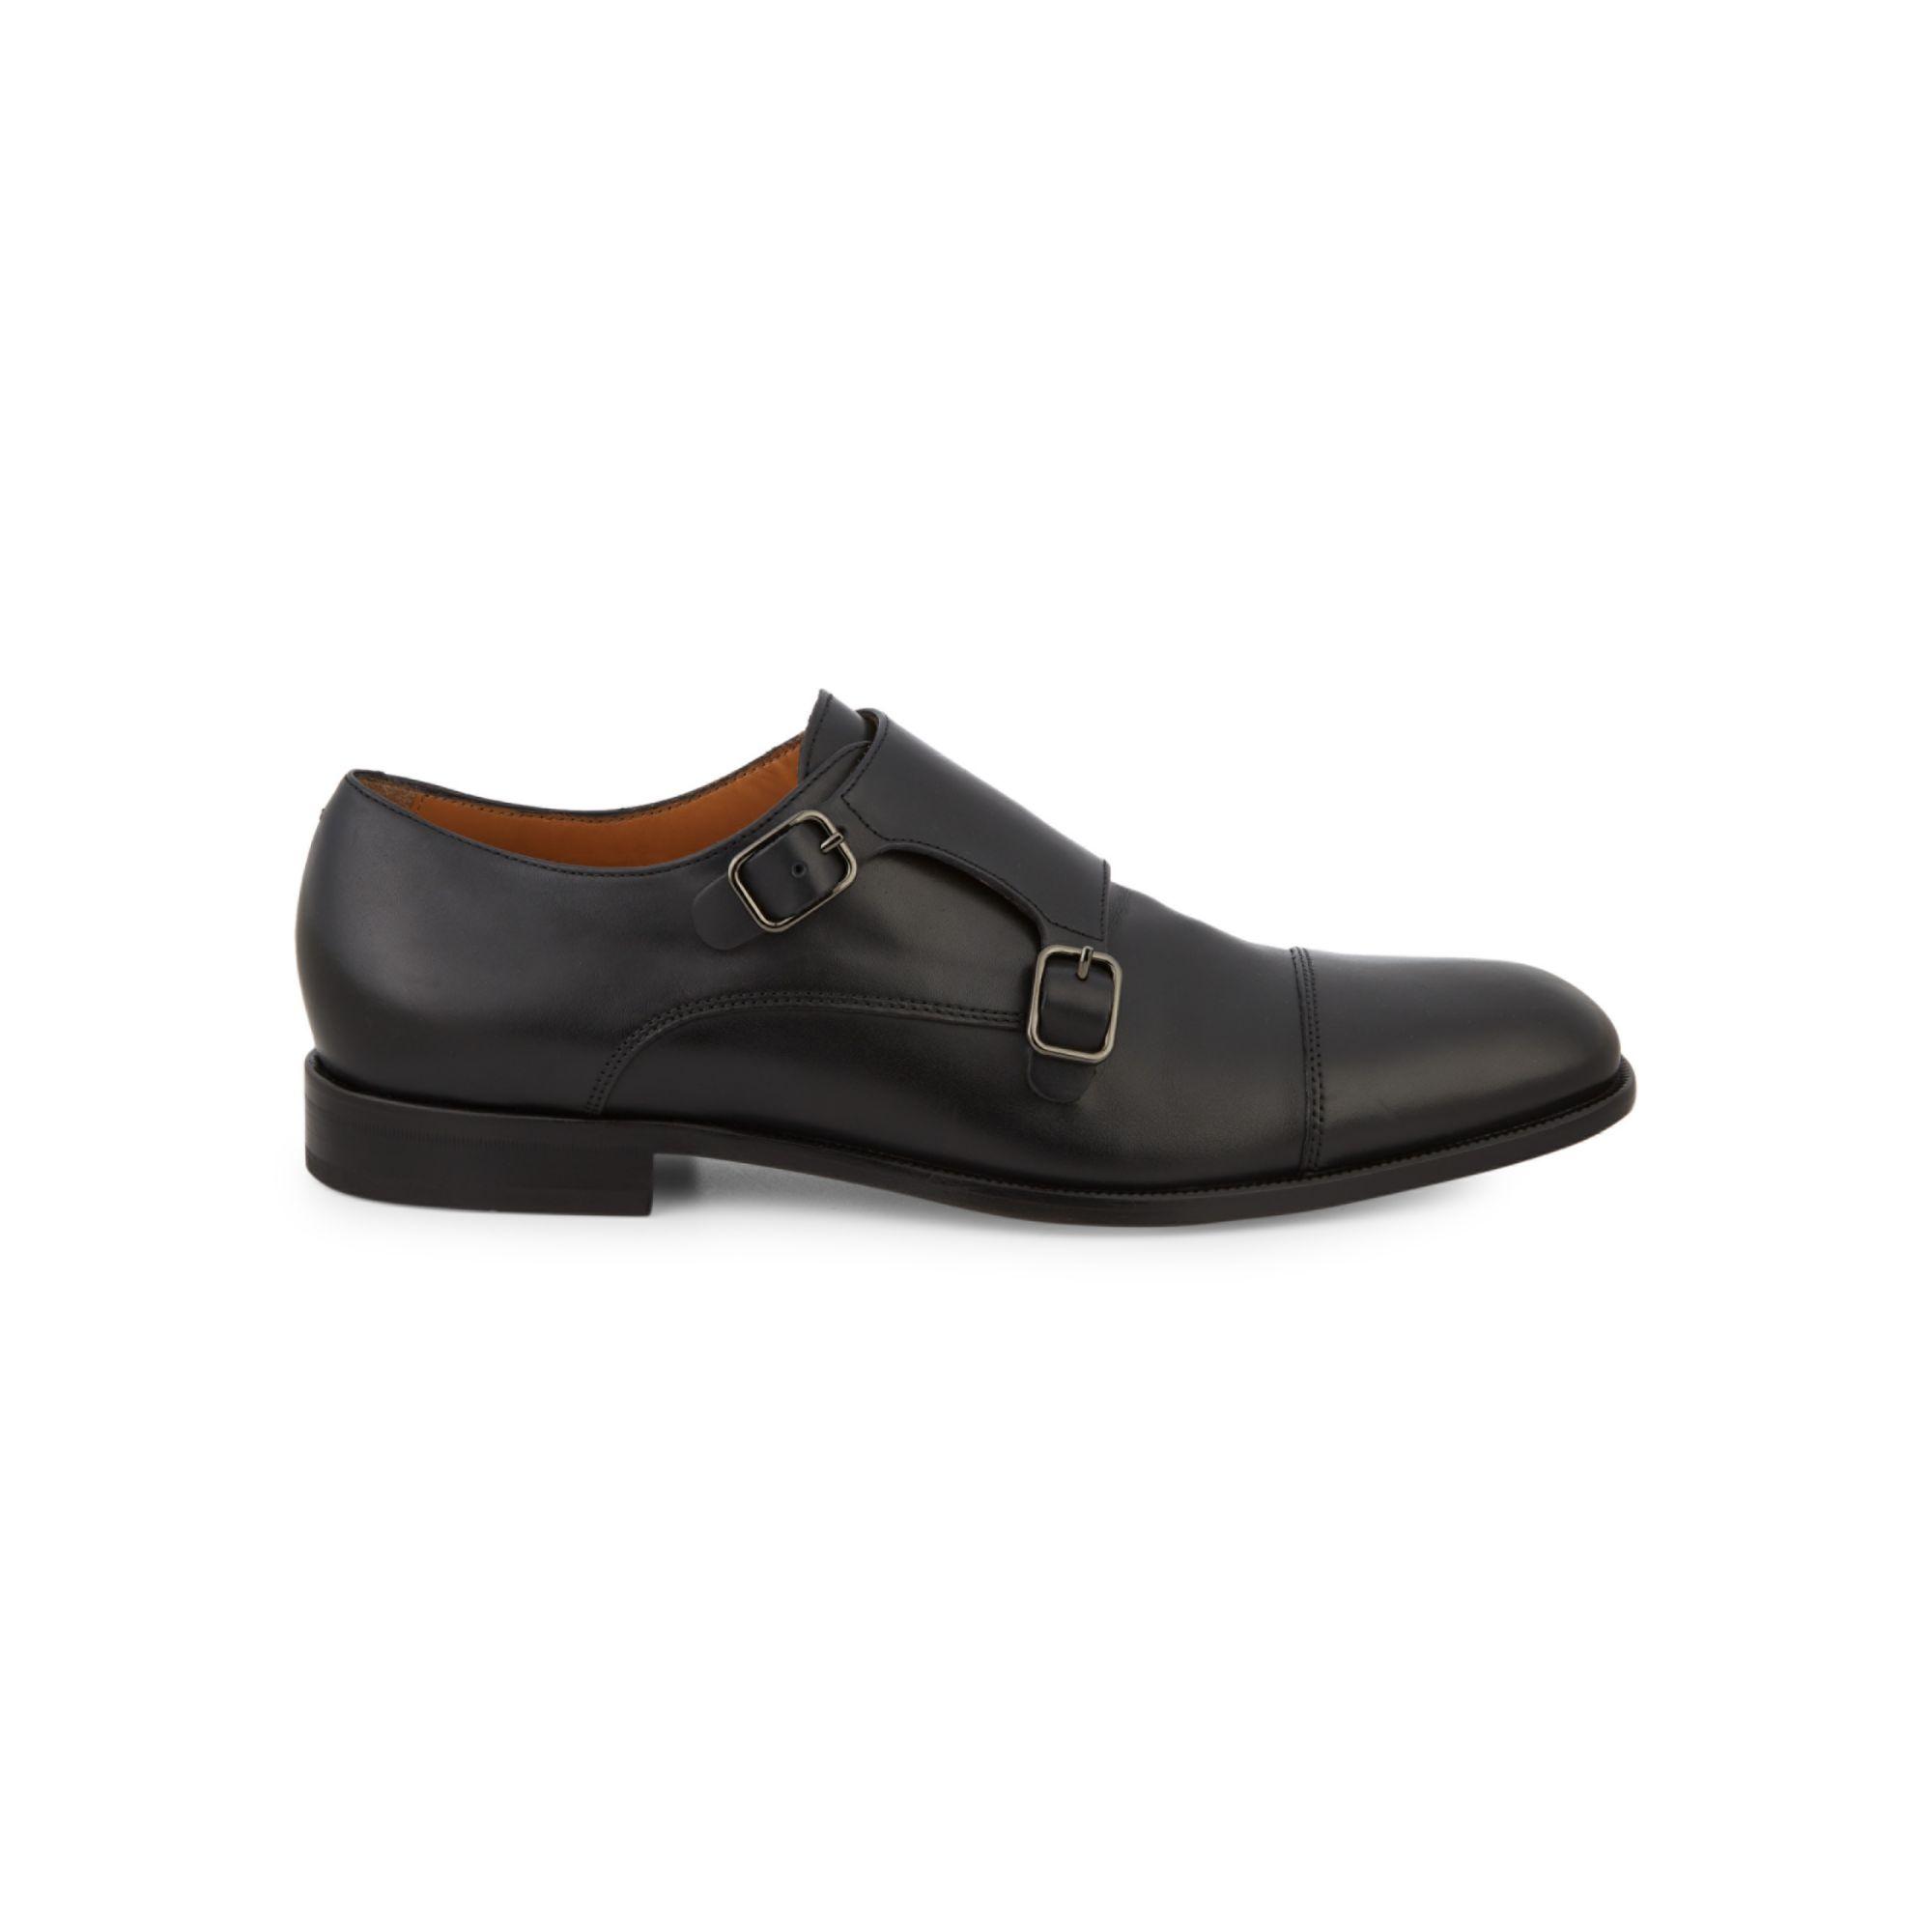 BOSS by Hugo Boss Cardiff Leather Double Monk-strap Shoes in Navy (Blue)  for Men - Lyst